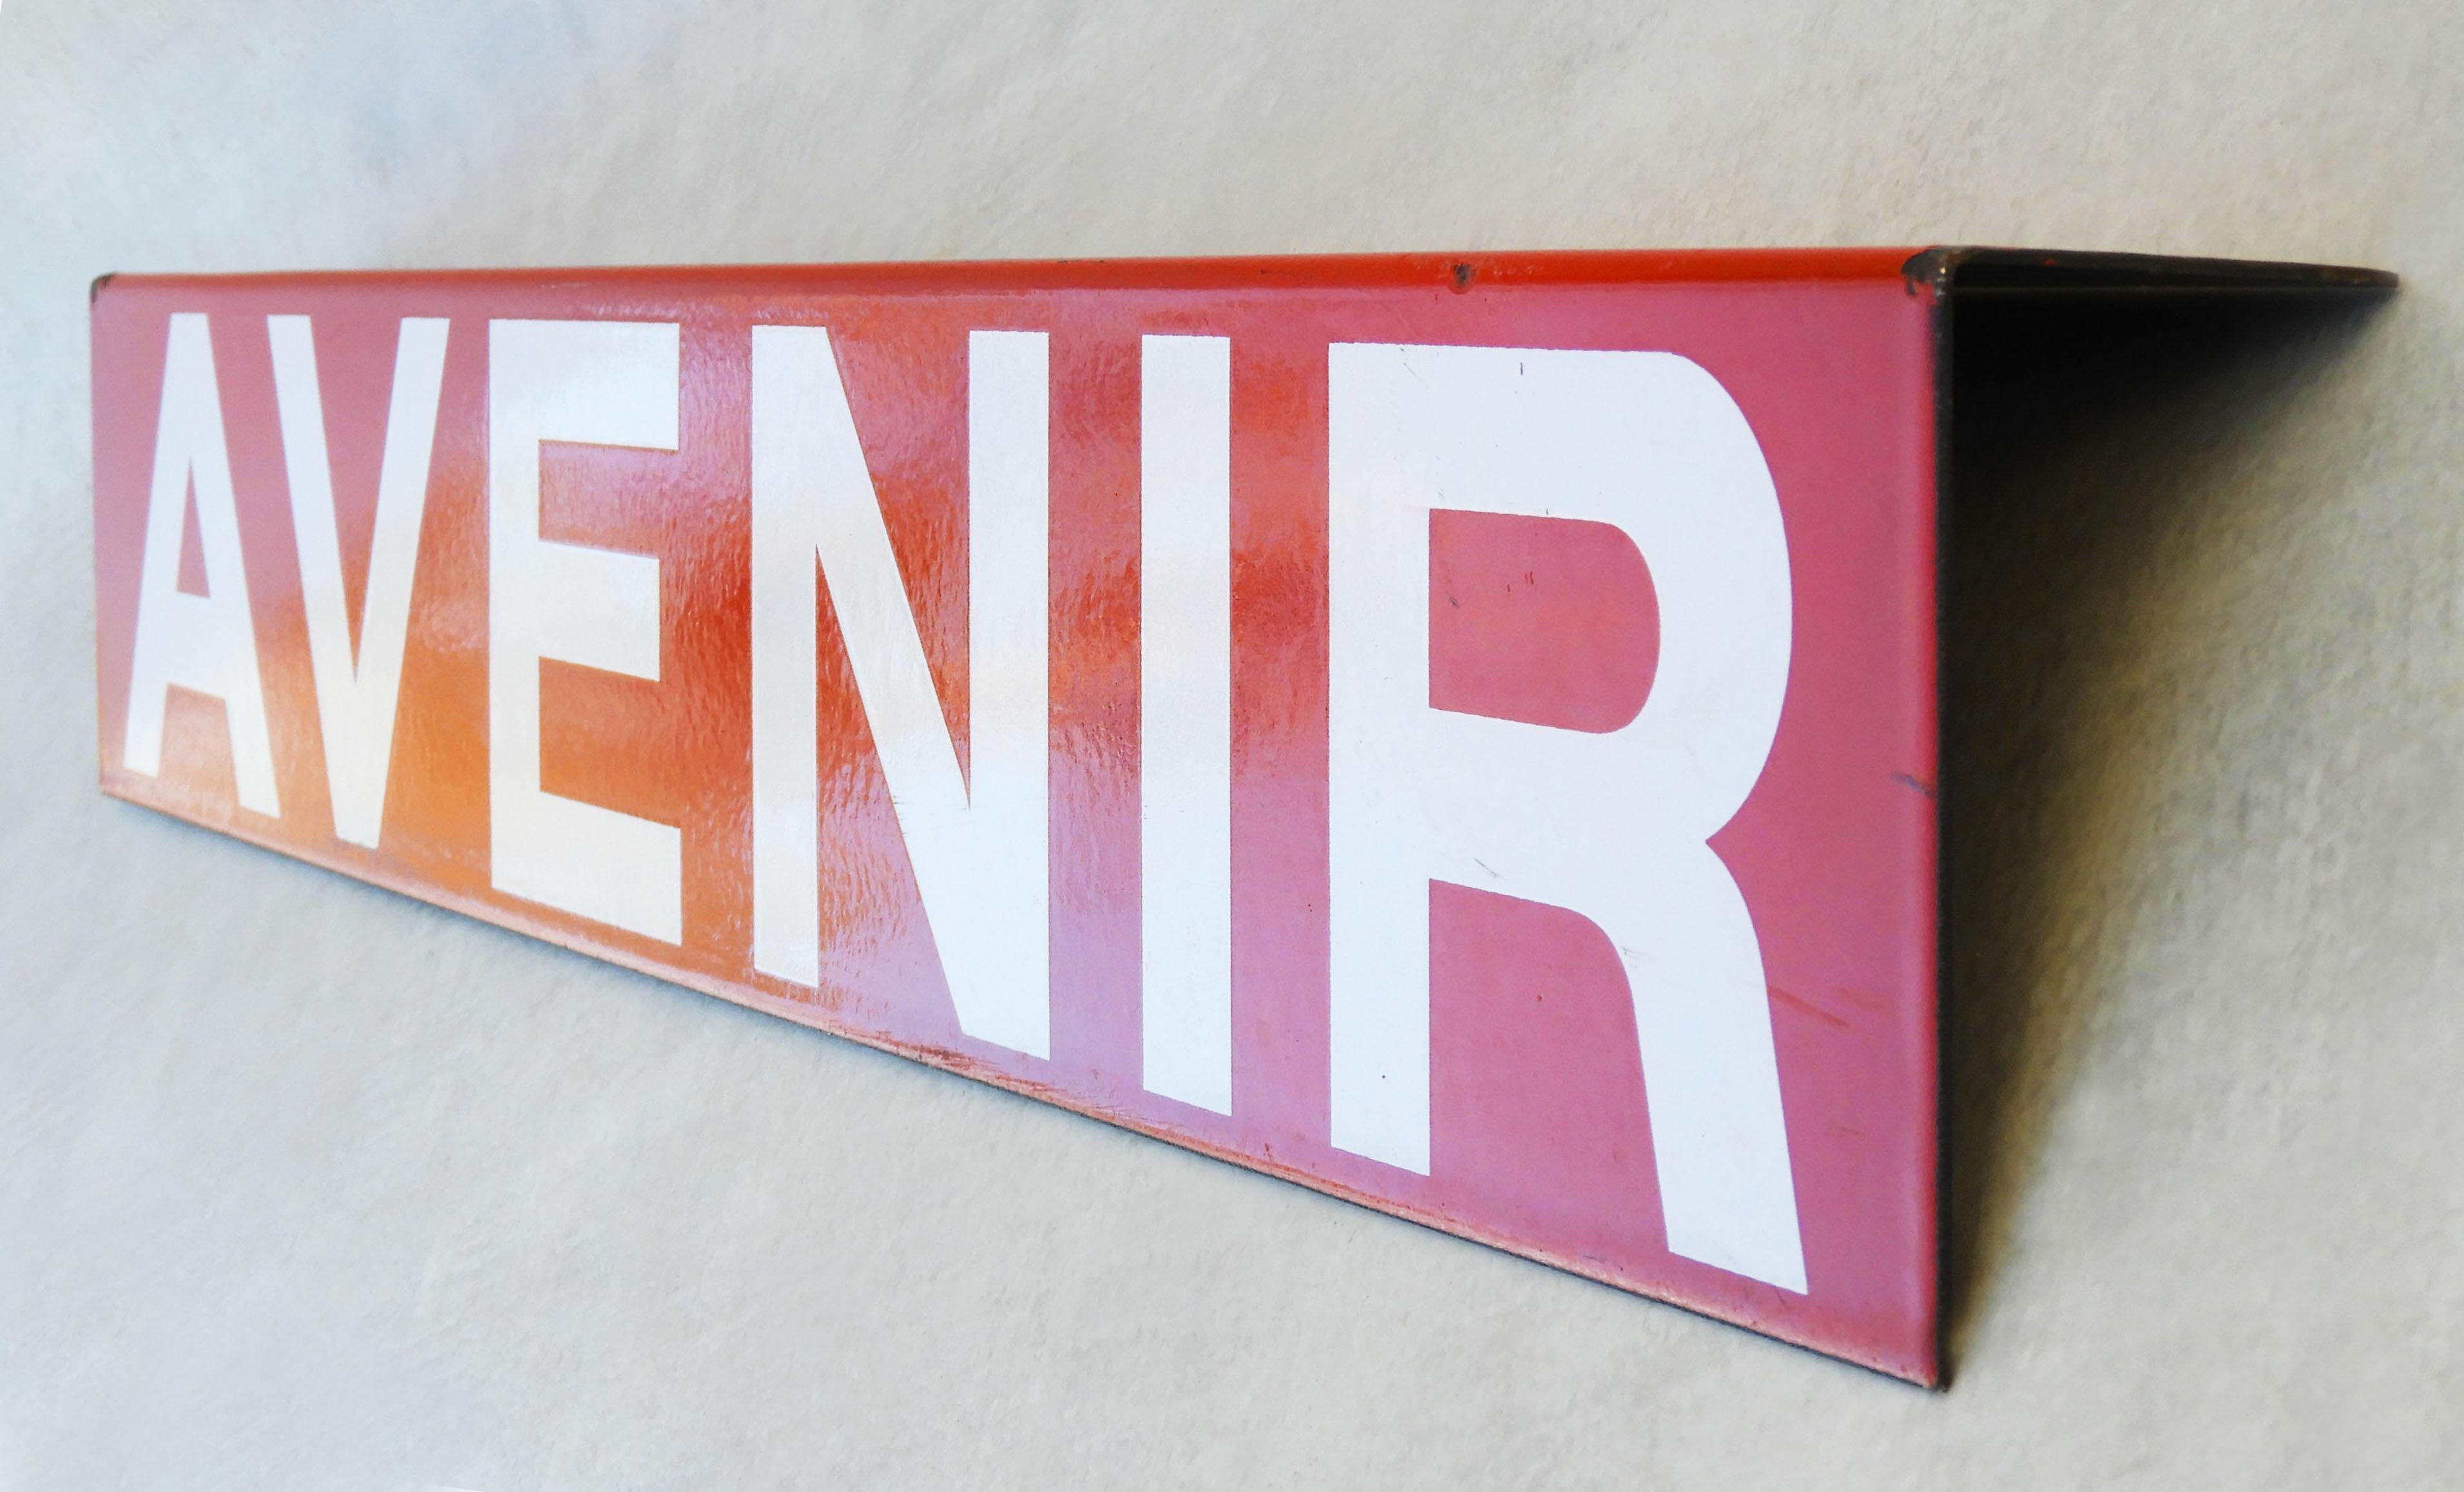 Vintage Enamel Publicity Sign c1960s France. 
An unusual French publicity sign used to advertise future events or products yet to come. Glossy red enamelled metal with AVENIR in white capital letters. This triangular sign can could be used